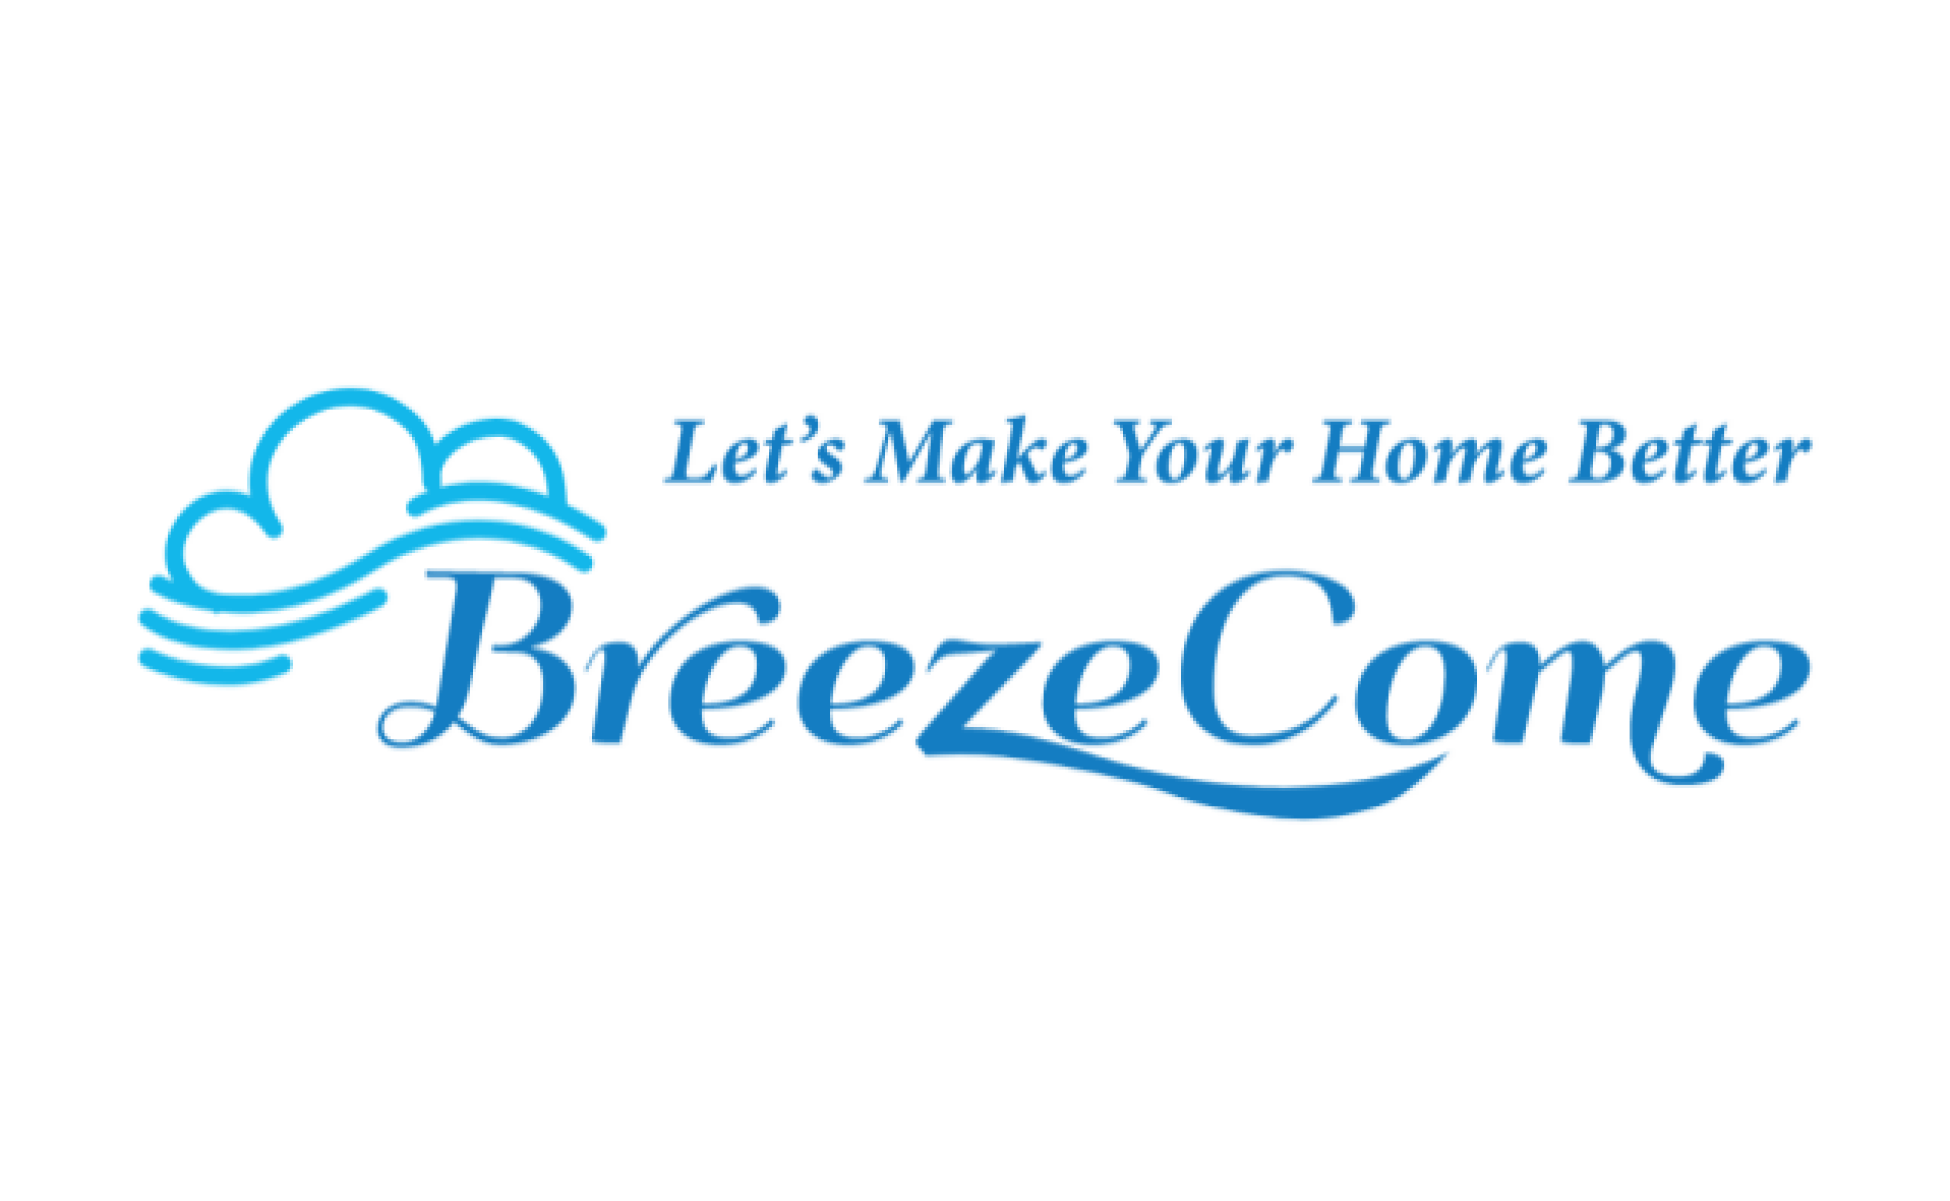 BreezeCome/ Quality Breeze Home Services